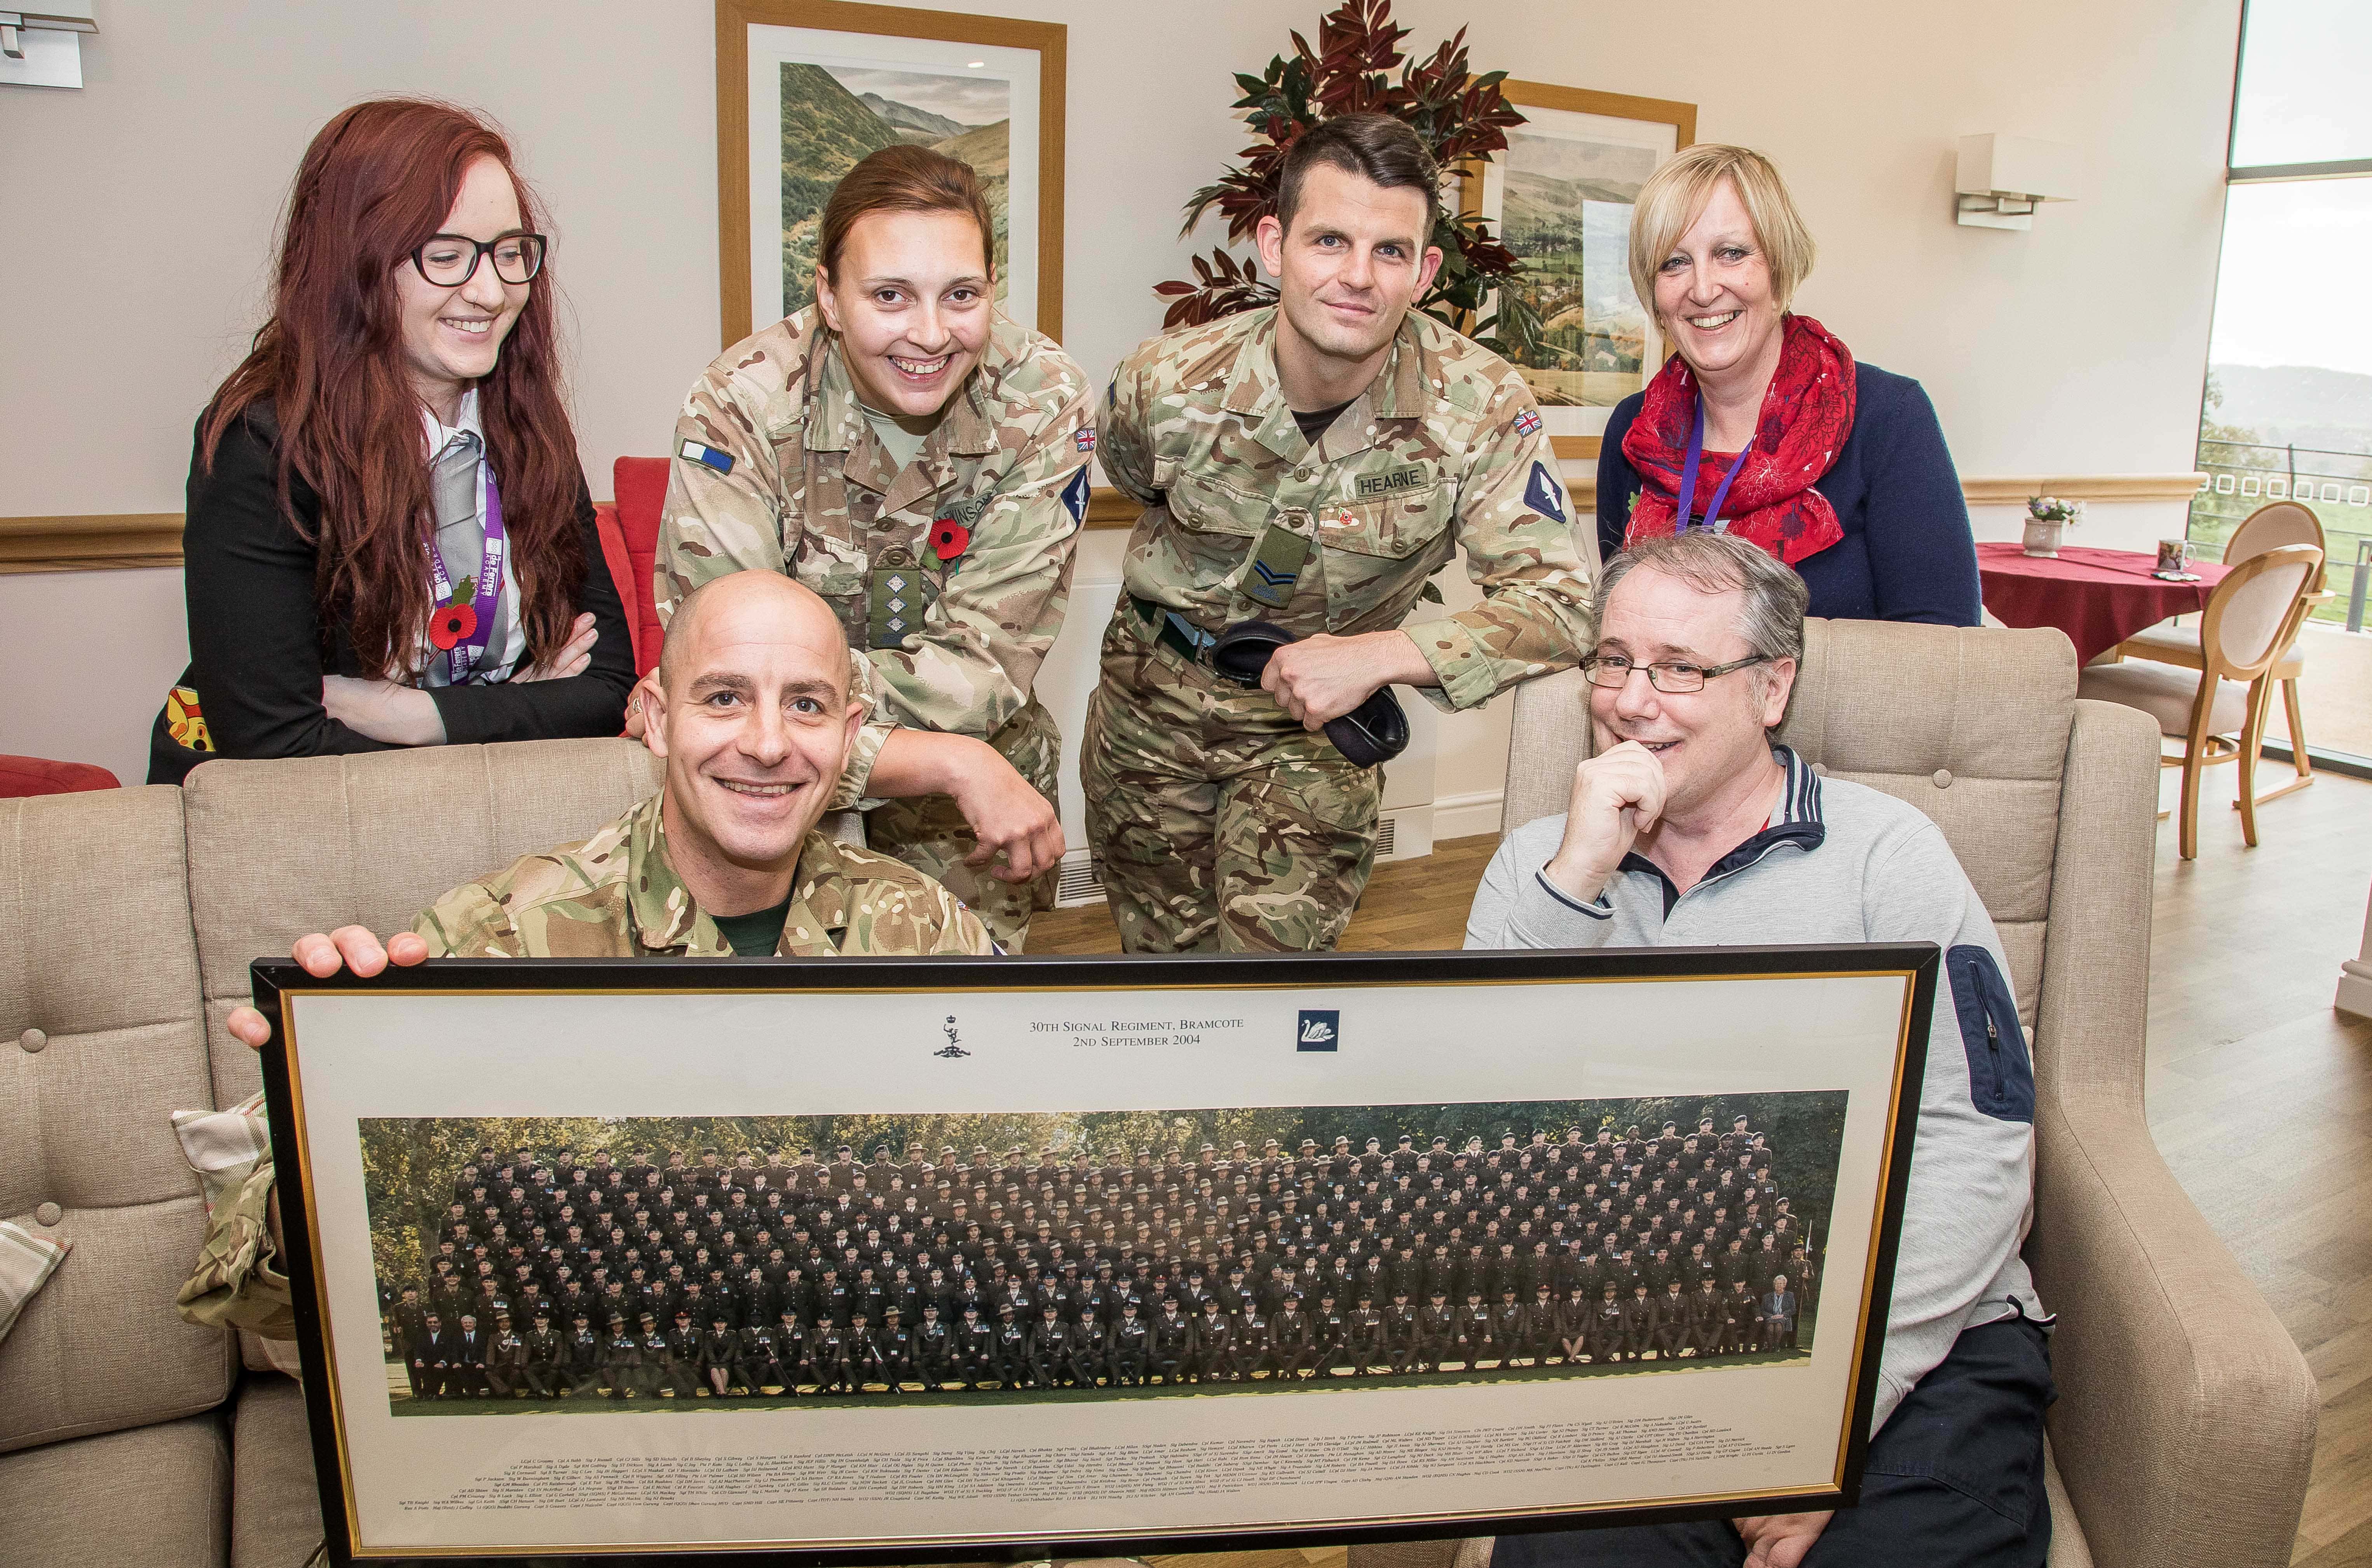 Soldiers’ visit brings back precious memories for Ian, living with dementia at 53